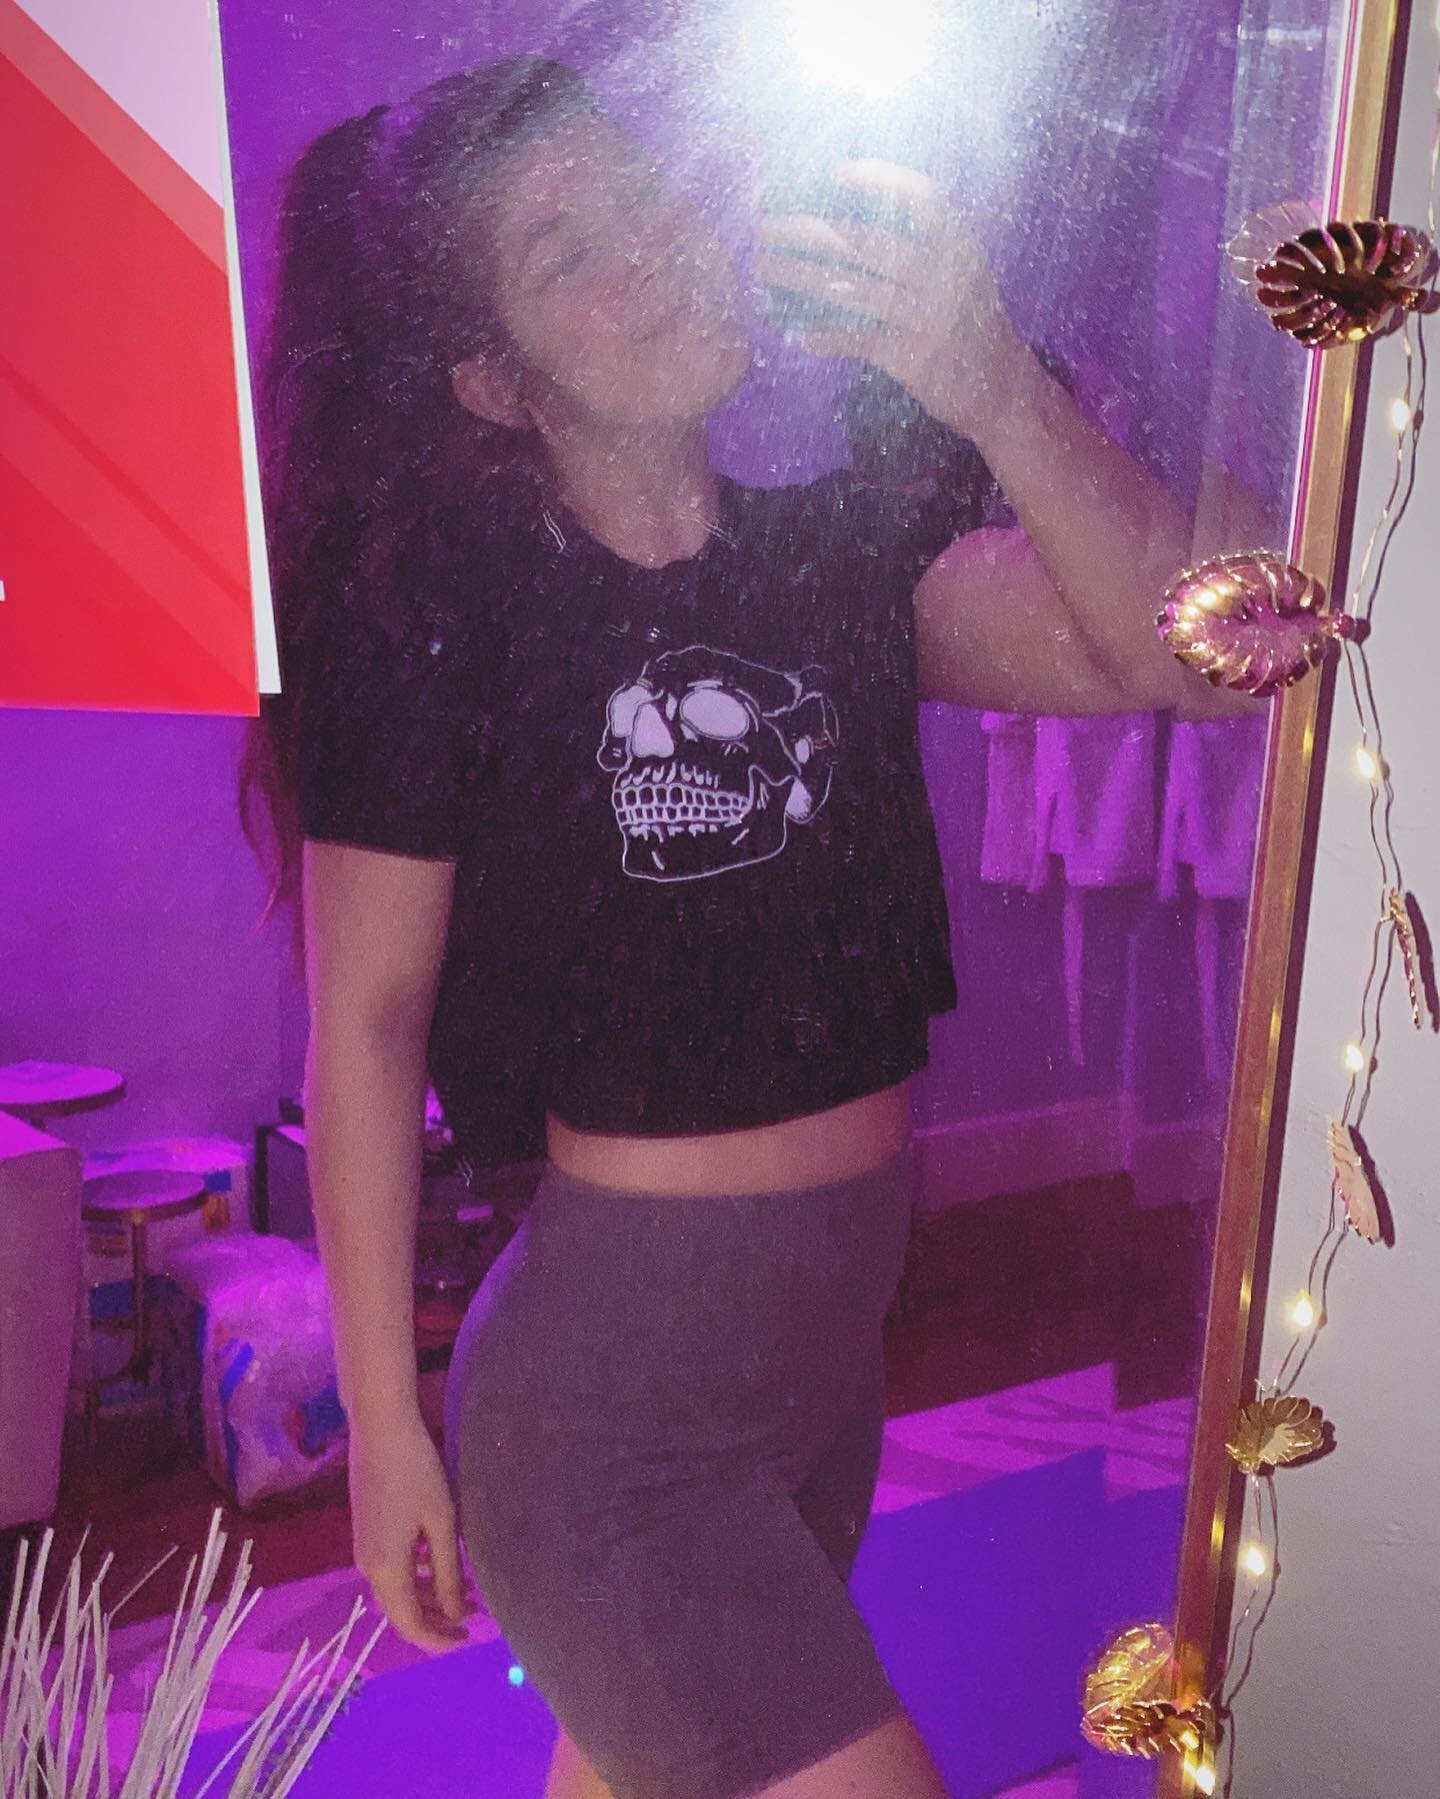 Absolute queen @a.gaspar21 slayinngggggggg our NEW DESIGN 😍💀🖤🔥🔥🔥🔥

There is nothing better than seeing our lovely humans smash a workout like a boss...in OUR CROPS 🖤🖤🖤

Visit LovelyBonesPT.com to shop now 💀

#rocklovelybones